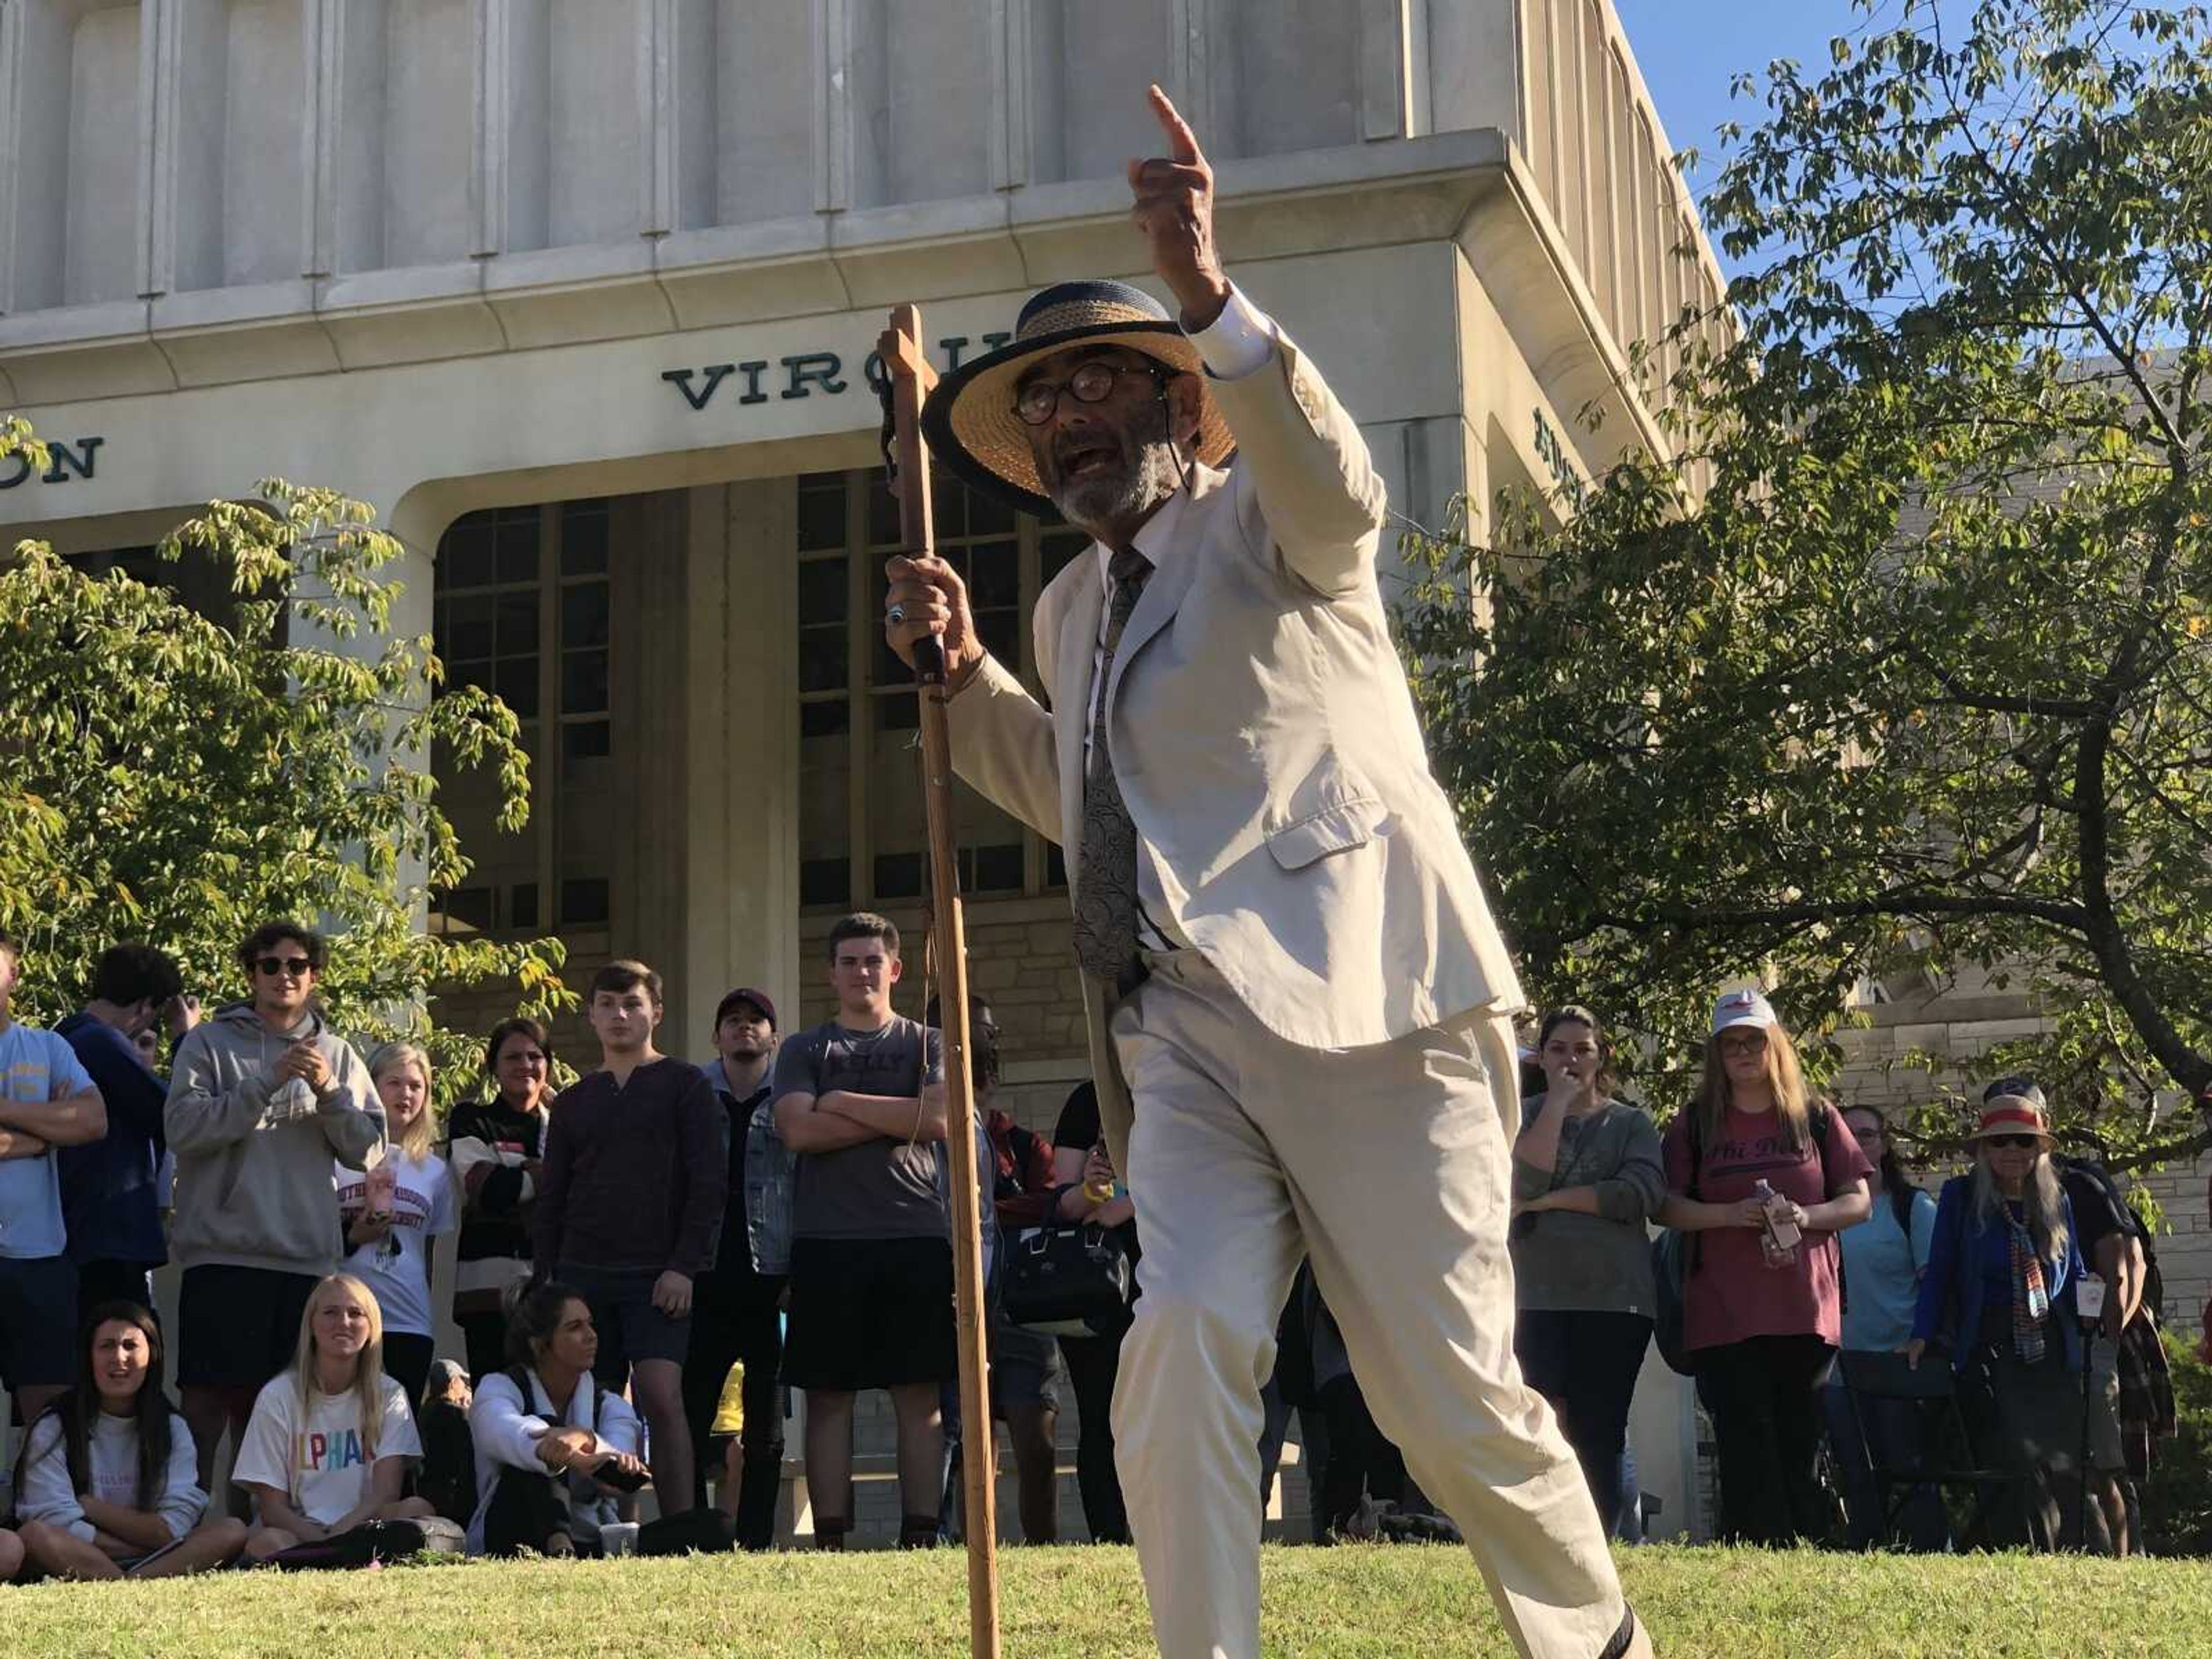 Brother Jed holds a crucifix staff and points into the crowd in front of Kent Library on Wednesday, Oct. 9.